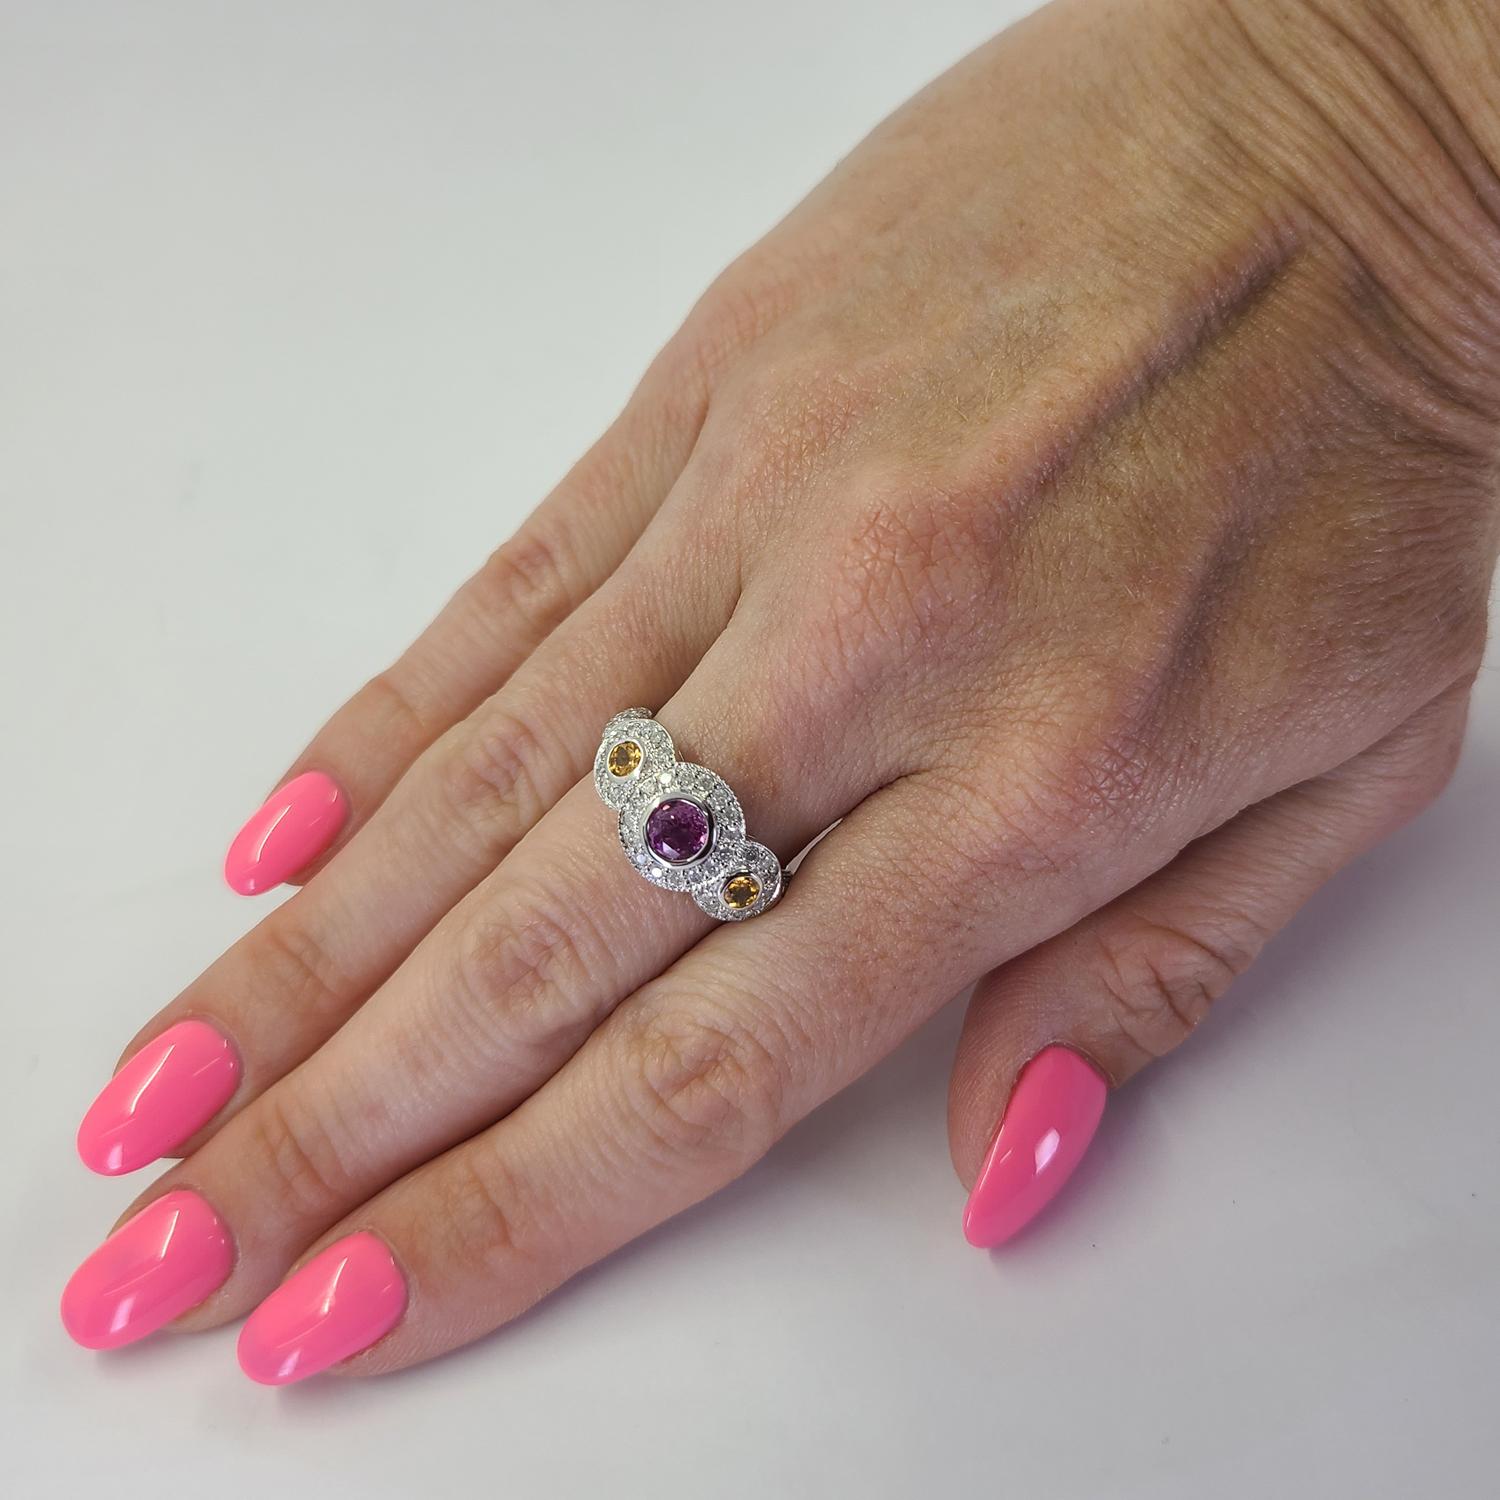 14 Karat White Gold Three Stone Ring Featuring A 0.40 Carat Round Bezel Set Pink Sapphire and Two Bezel Set Round Citrines Totaling 0.20 Carats Accented By 68 Round Brilliant Cut Diamonds of I Clarity and H/I Color Totaling An Additional 0.34